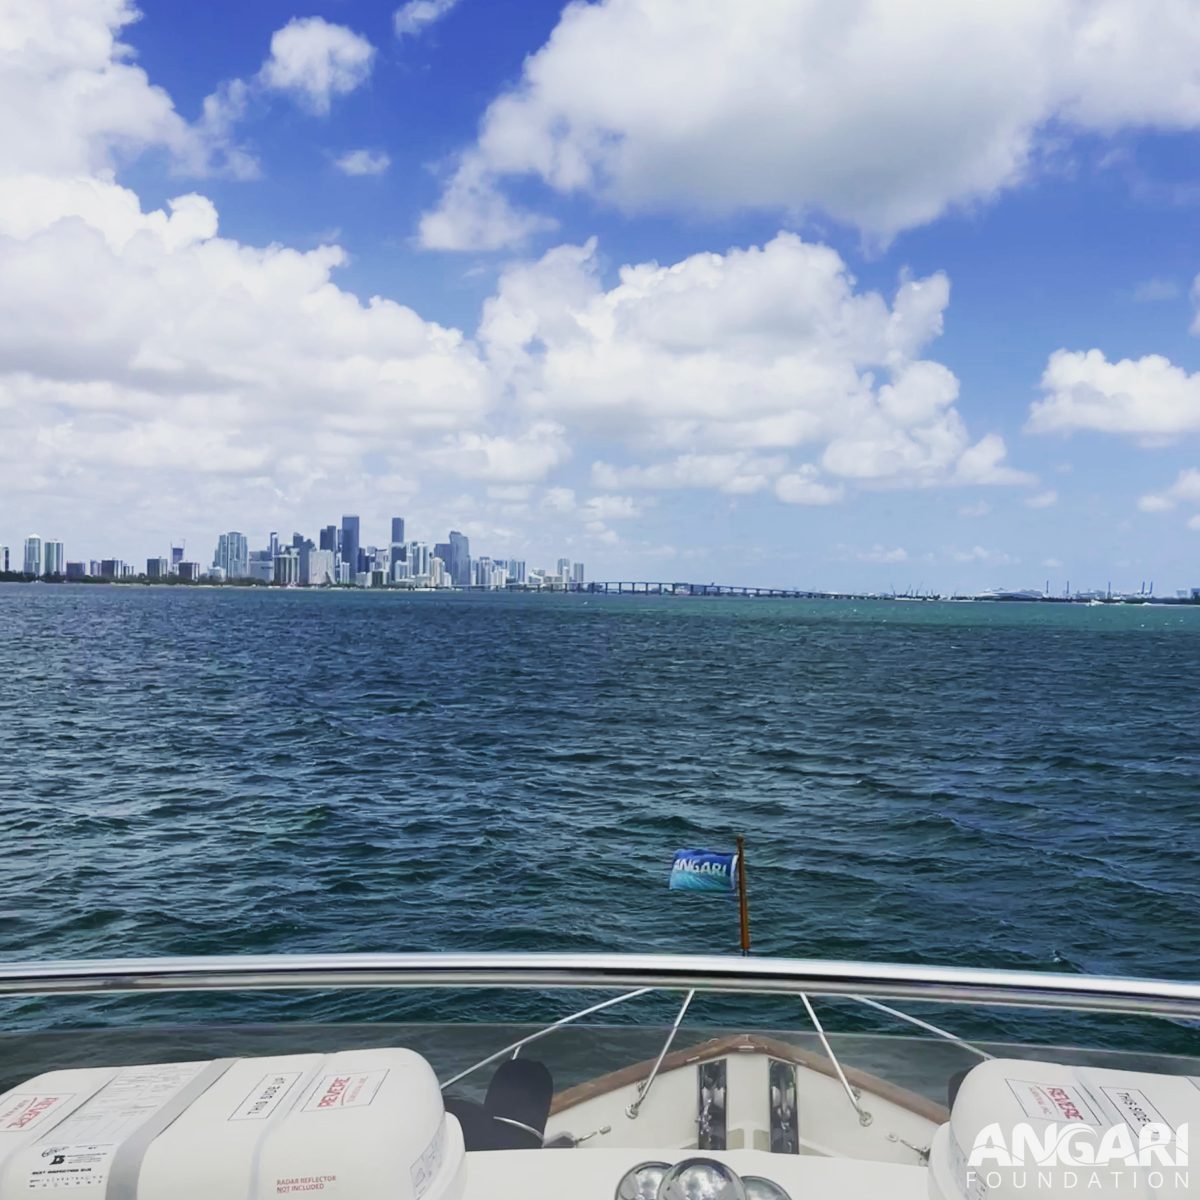 EXP 63: What a great day on the water working in Biscayne Bay, Miami. PC: Angela Rosenberg